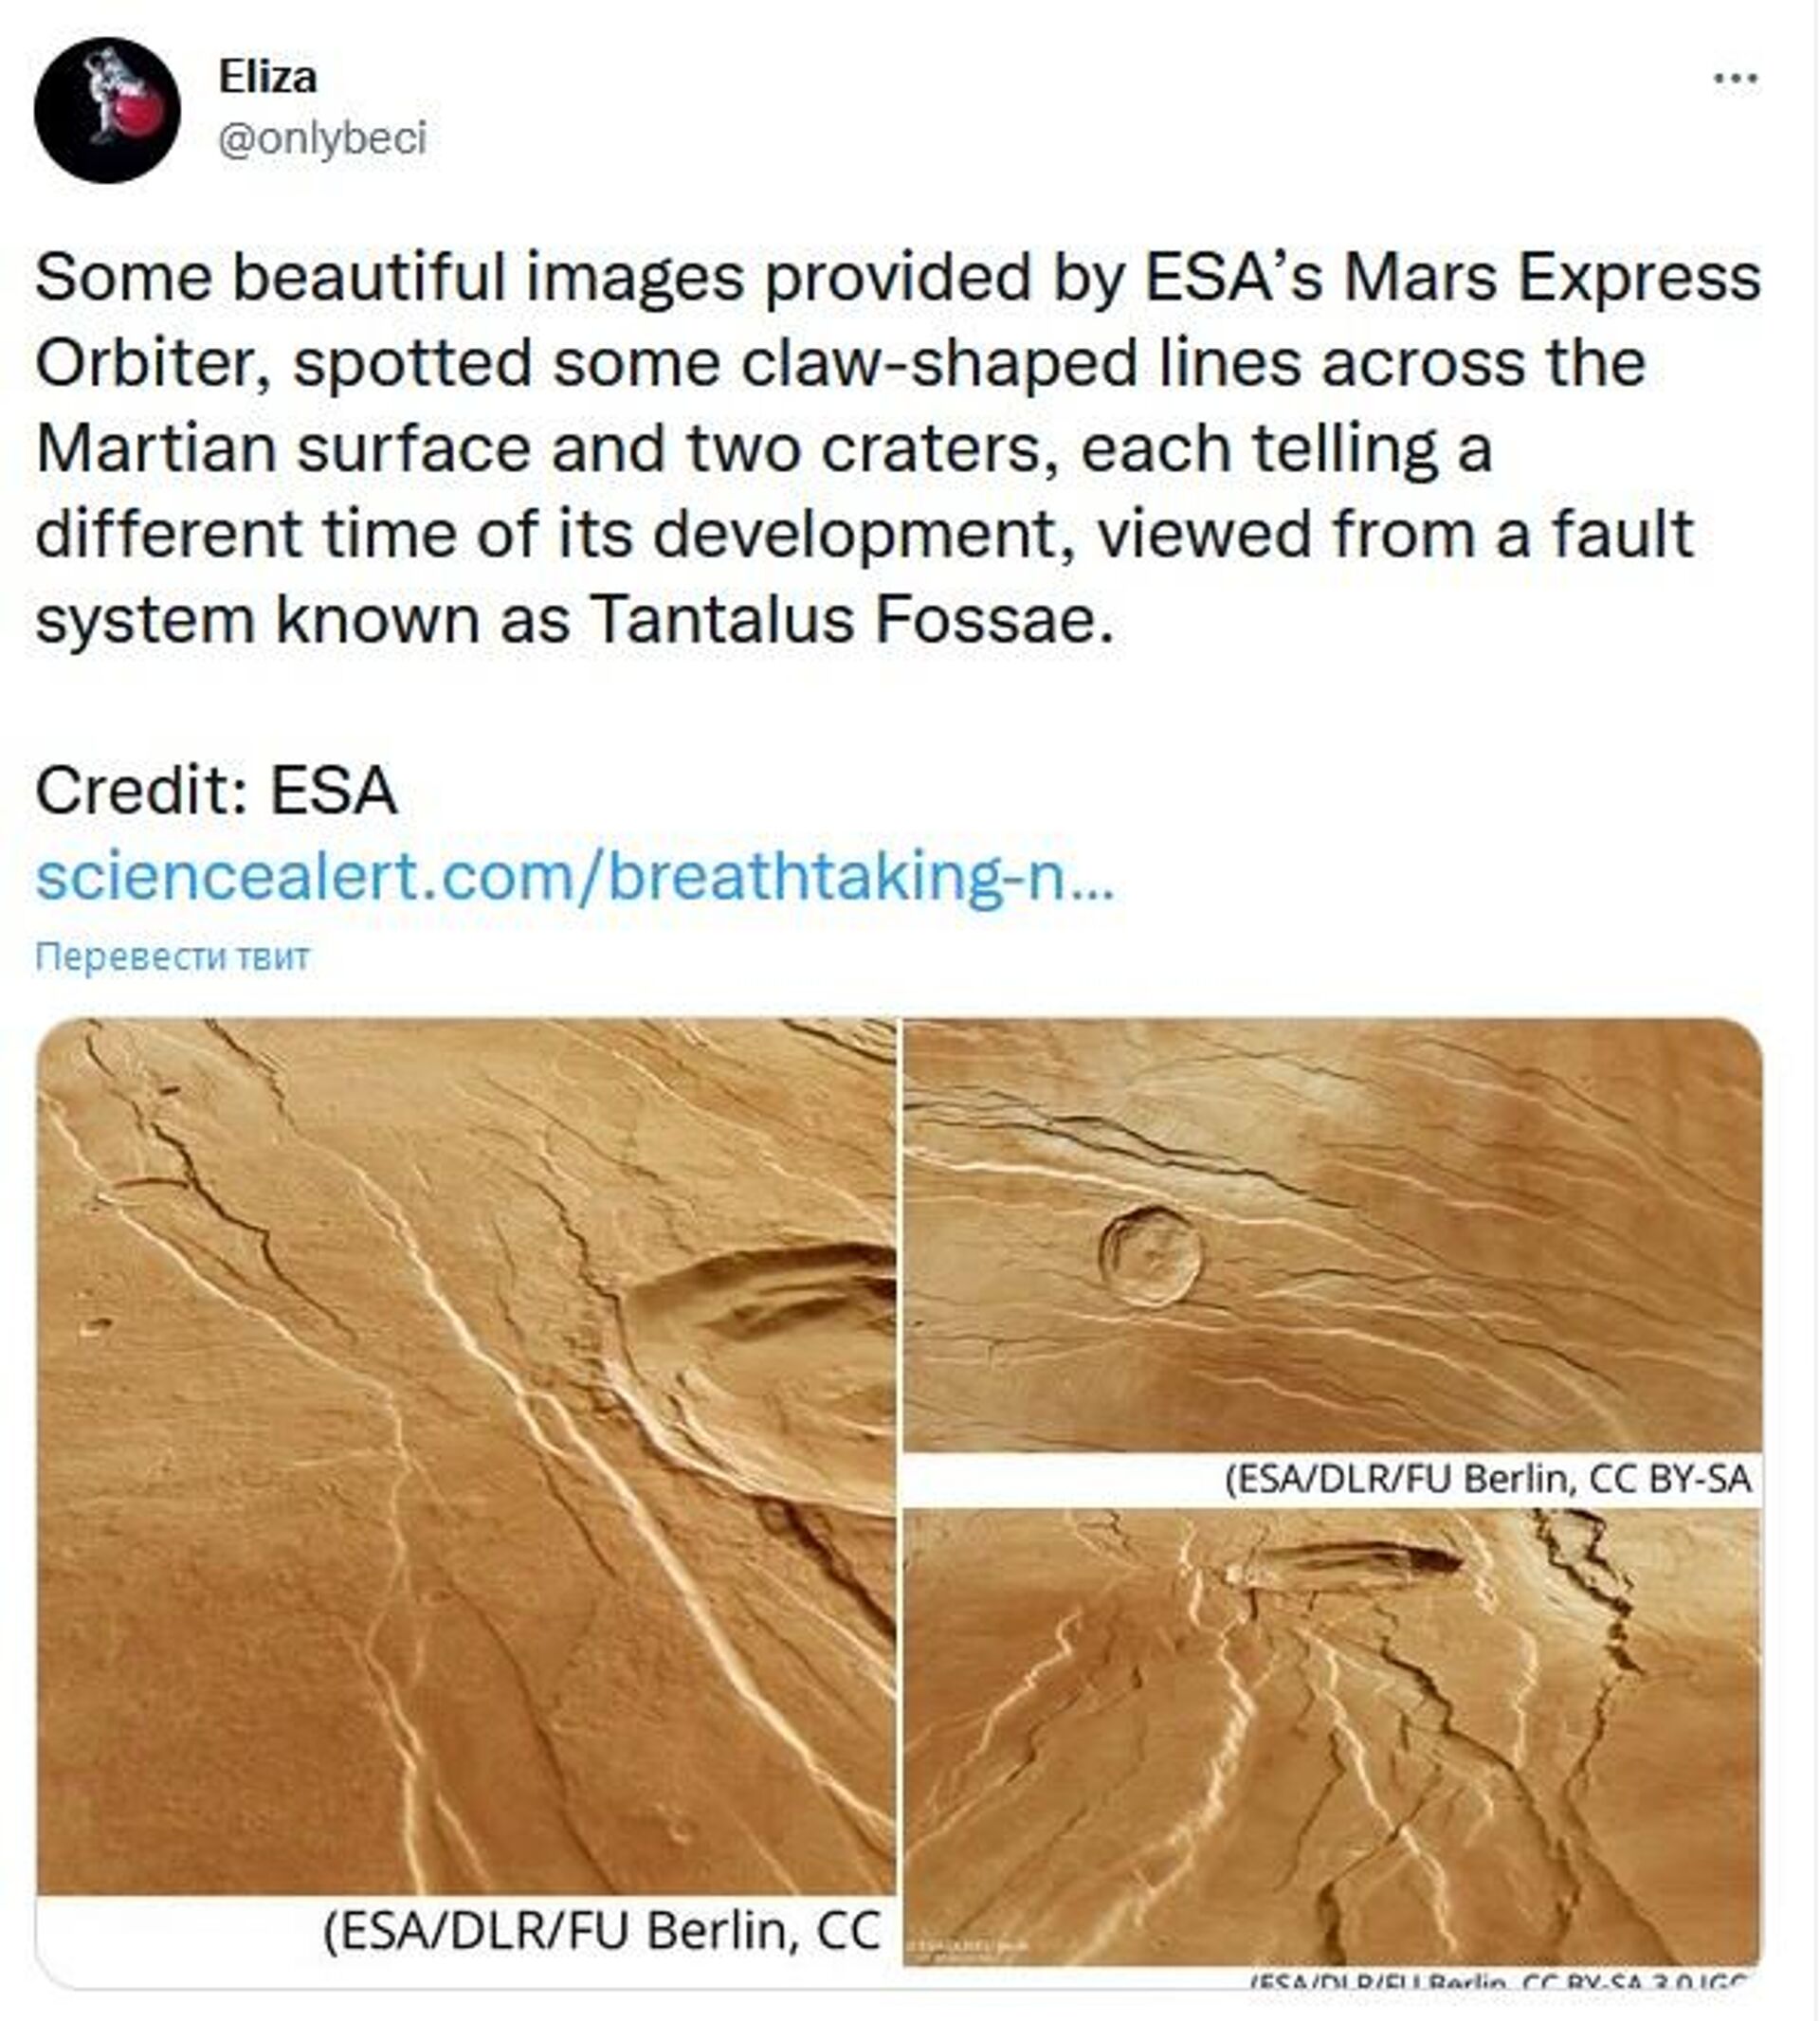 Images provided by ESA’s Mars Express Orbiter show claw-shaped lines across the Martian surface  - Sputnik International, 1920, 09.05.2022